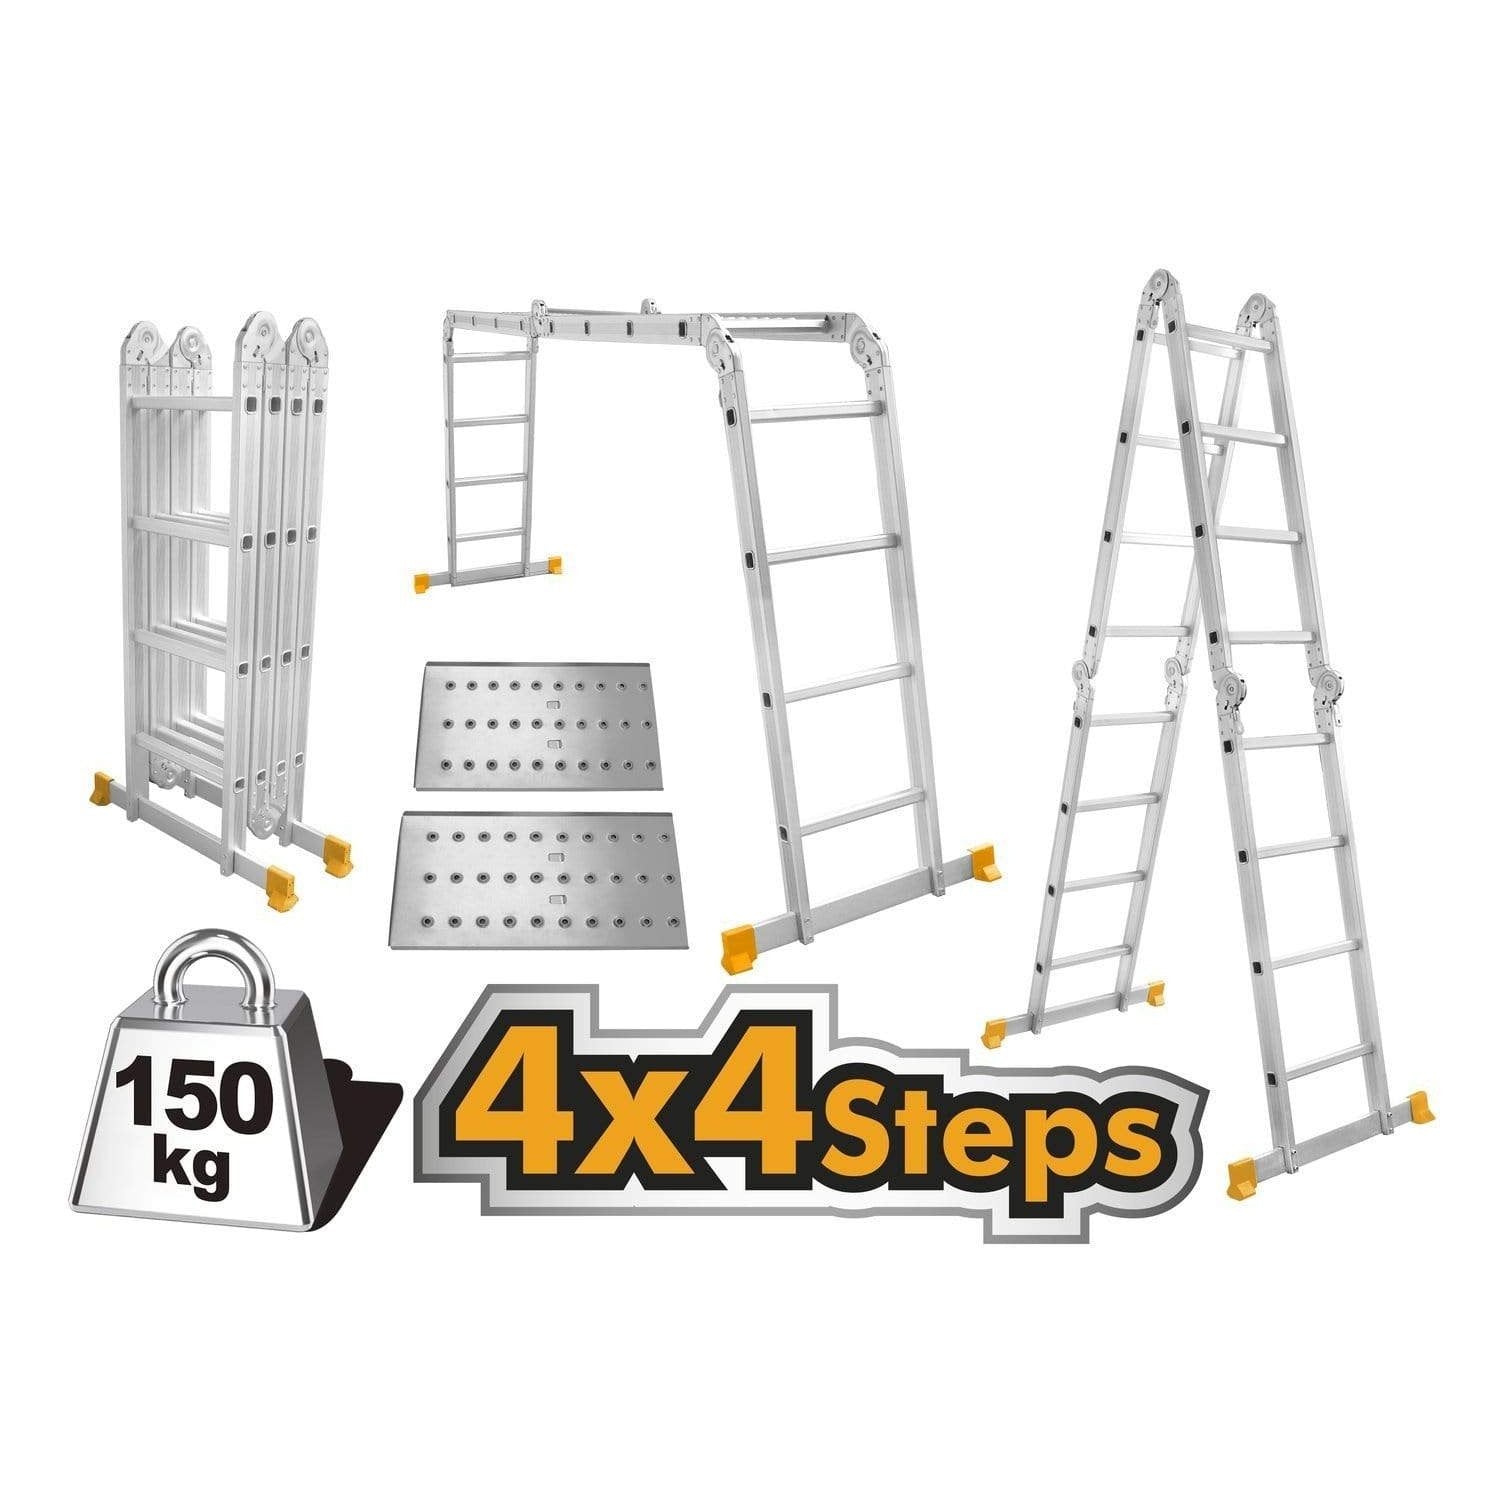 Ingco 3 Section Extension Ladder - HLAD03391 | Supply Master | Accra, Ghana Steel & Engineering Building Steel Engineering Hardware tool